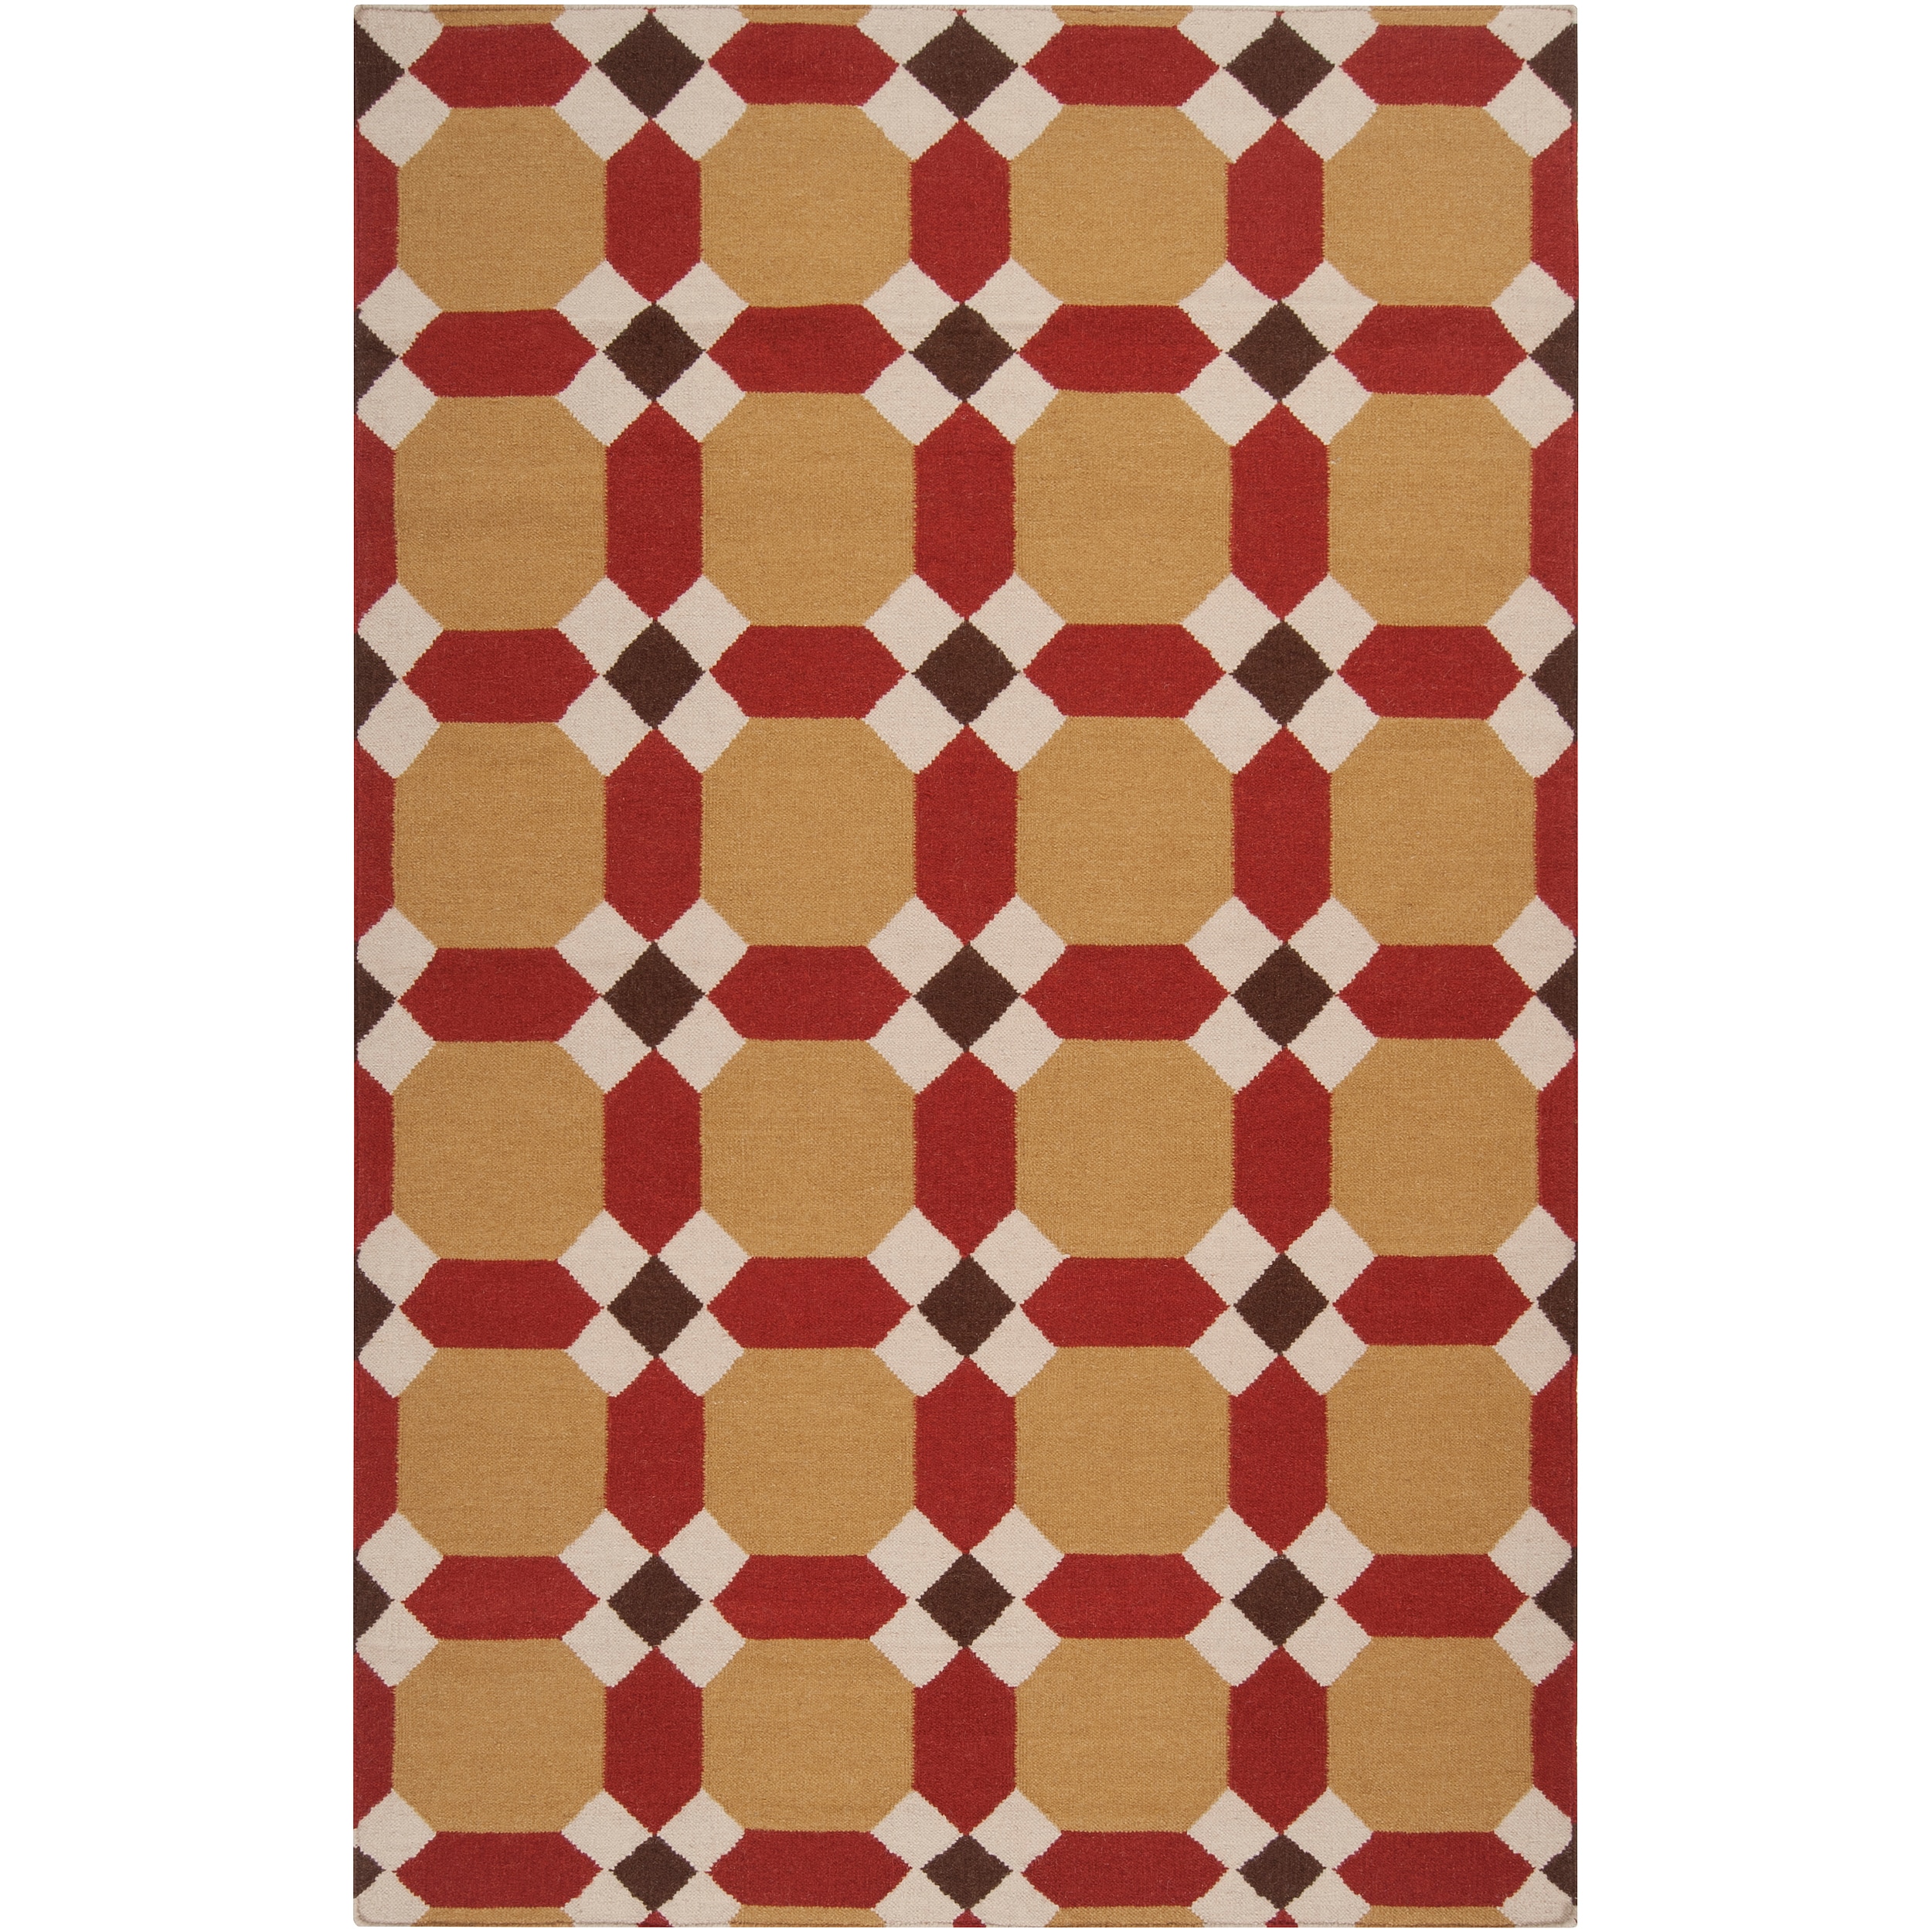 Smithsonian Contemporary Handwoven Red Anchor Wool Rug (36 X 56)